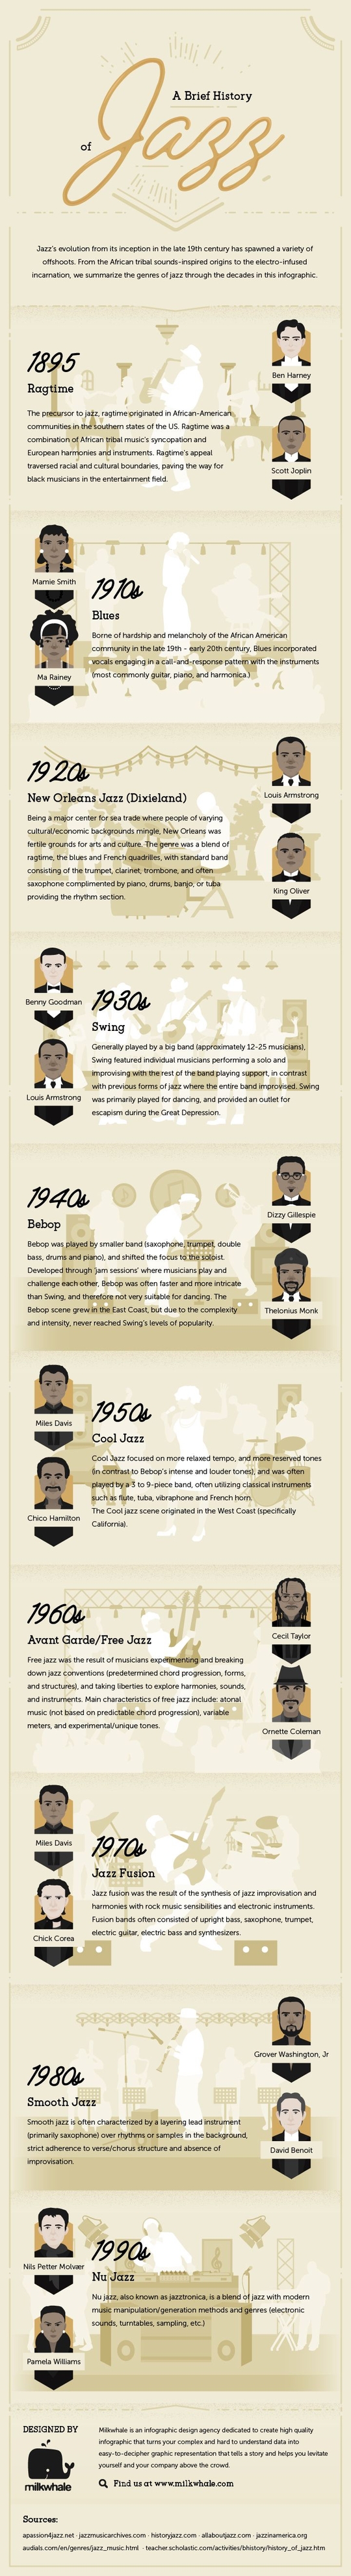 An infographic titled "A Brief History of Jazz" designed by Milkwhale.com.